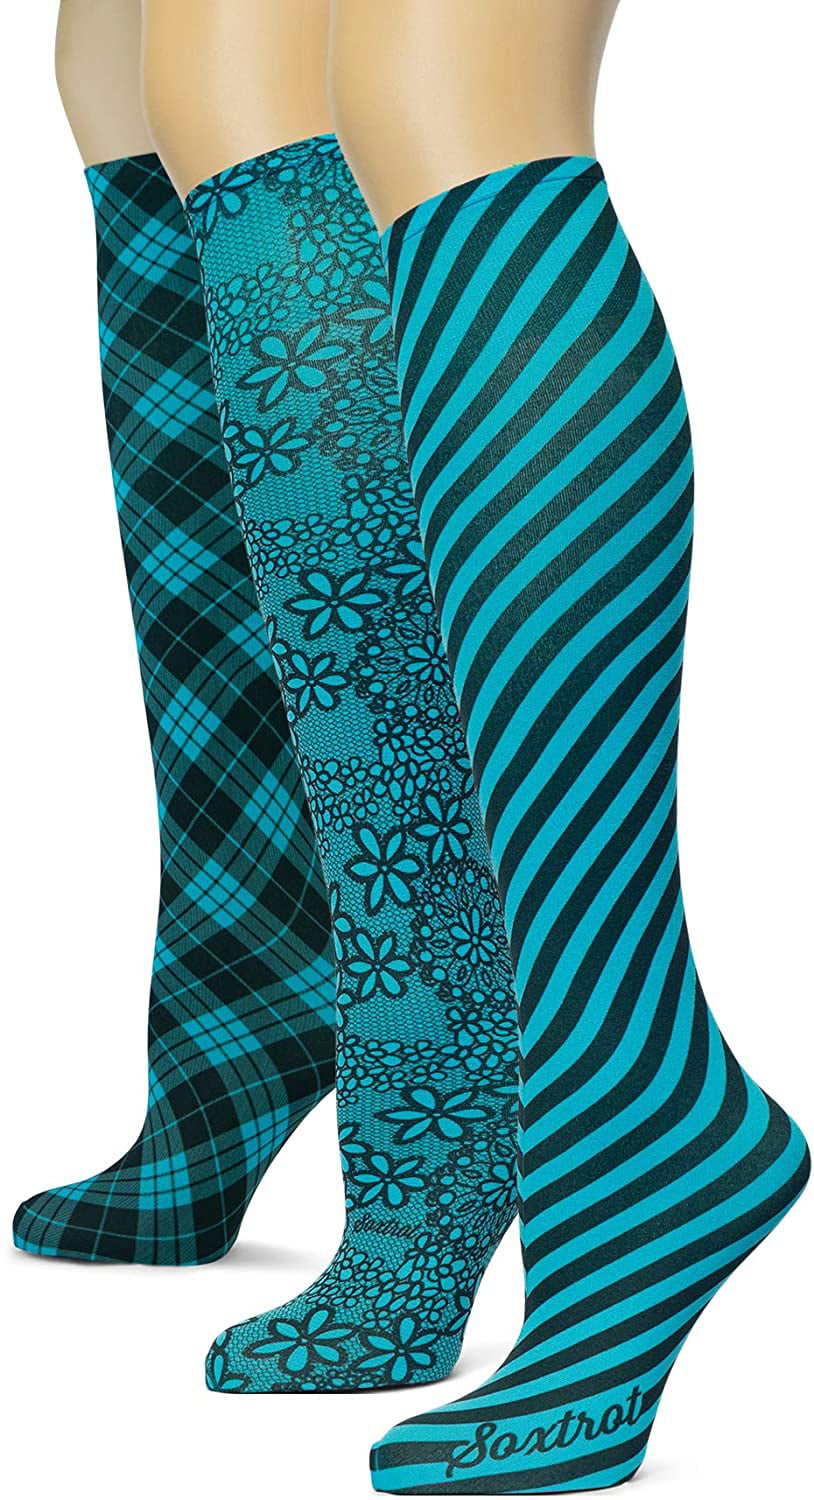 Silky Smooth Material Sox Trot Women's 3 Pairs Knee High Trouser Socks Classy and Colorful Printed Patterns